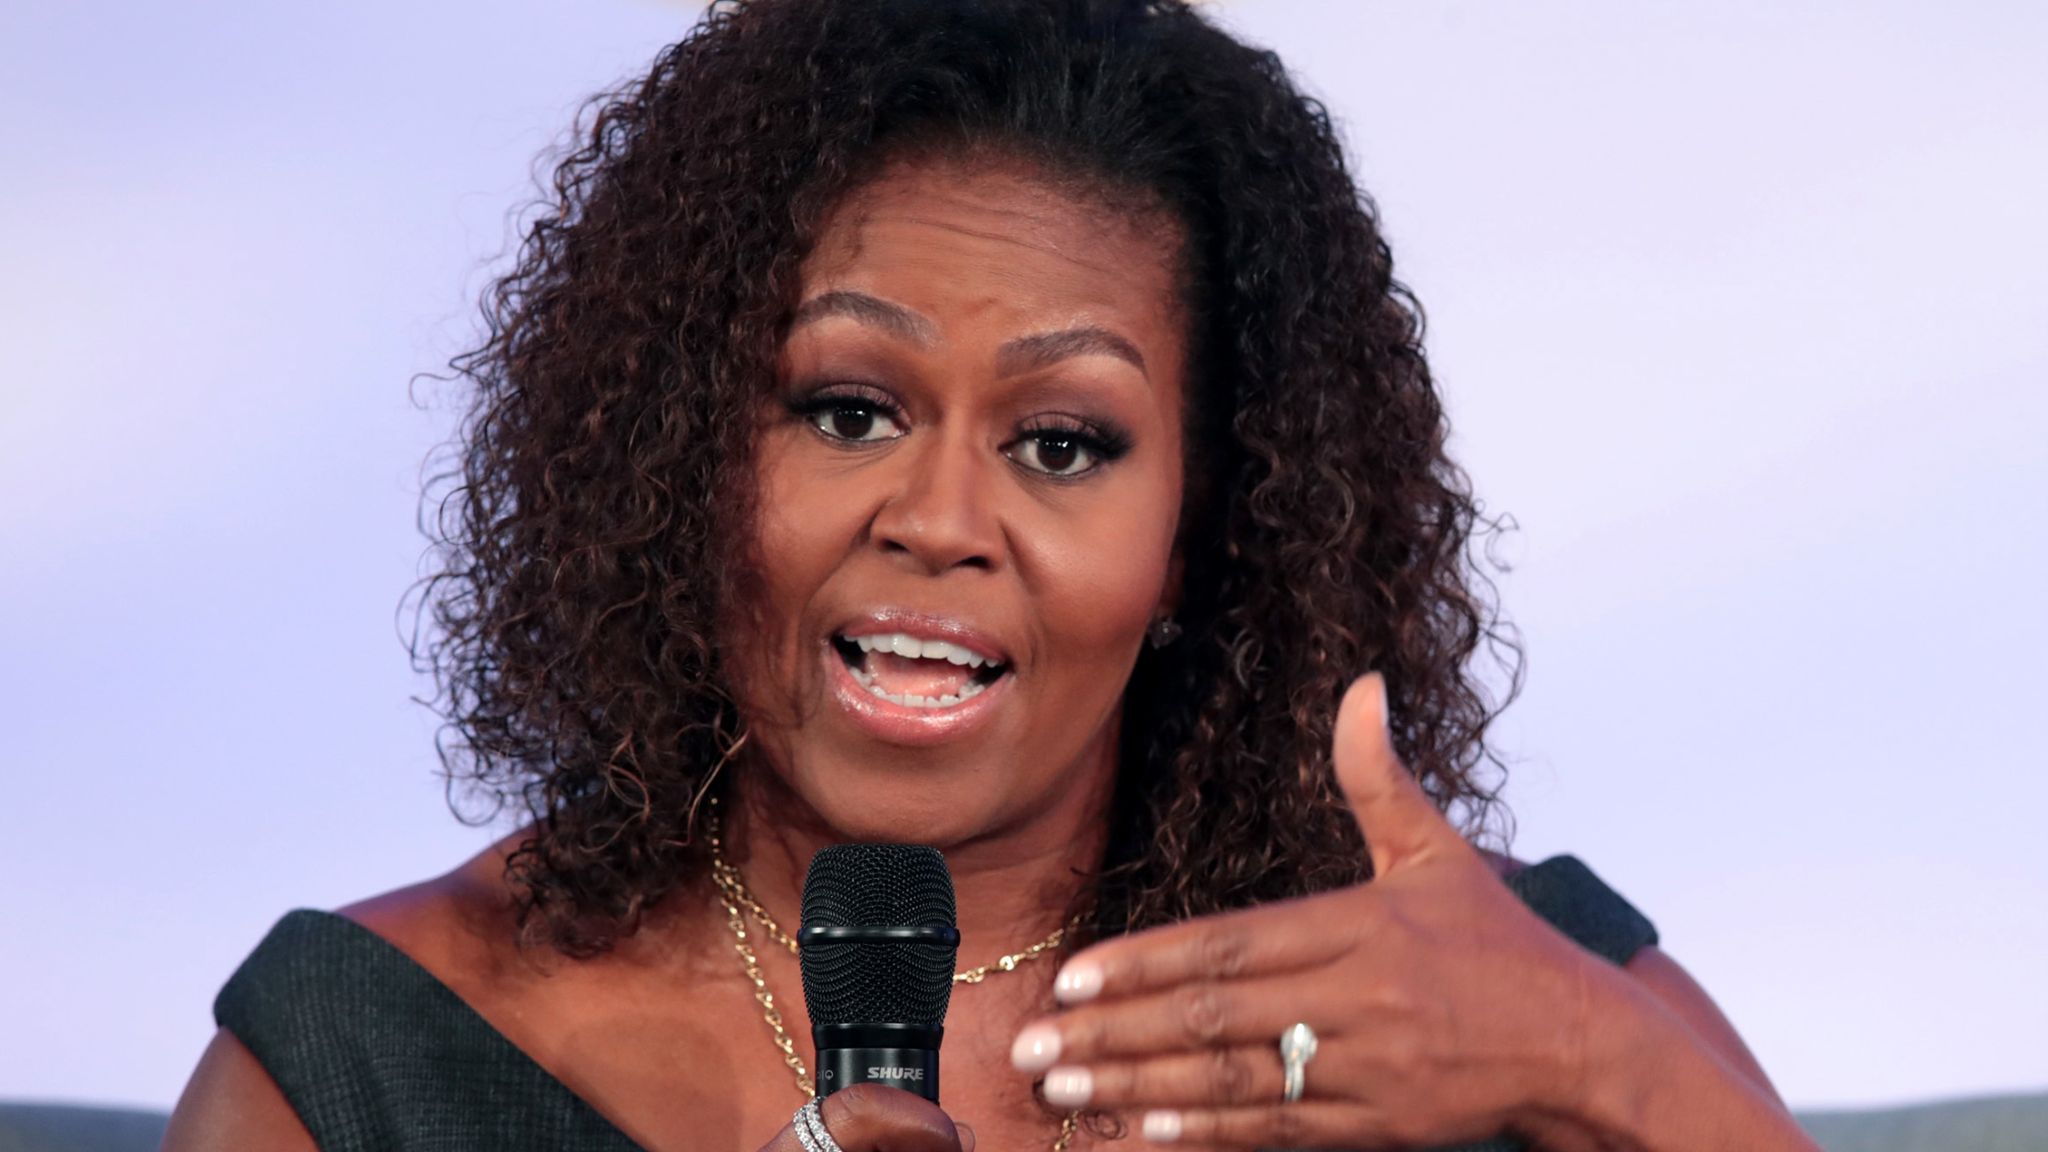 Michelle Obama "Becoming" Documentary Earn Her Huge Cash